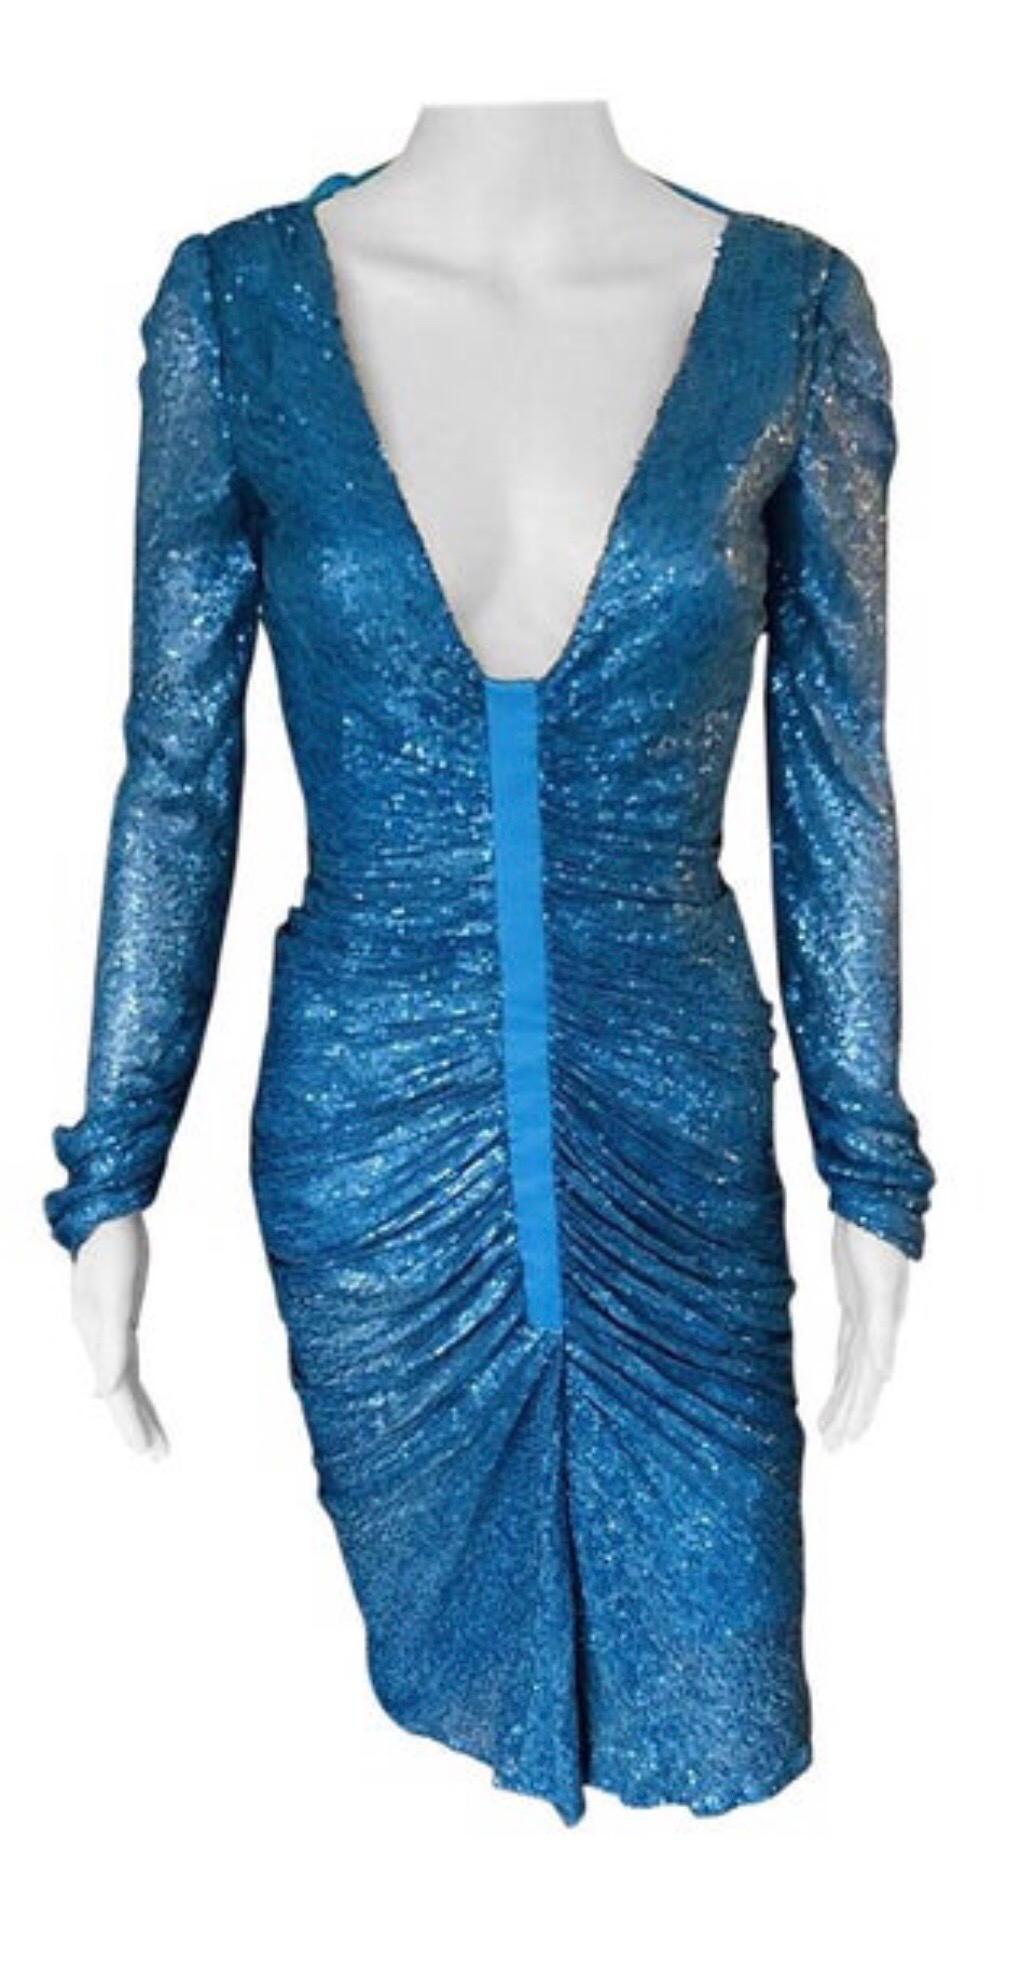 Women's Gianni Versace S/S 2001 Runway Blue Sequin Embellished Cutout Back Dress Gown For Sale